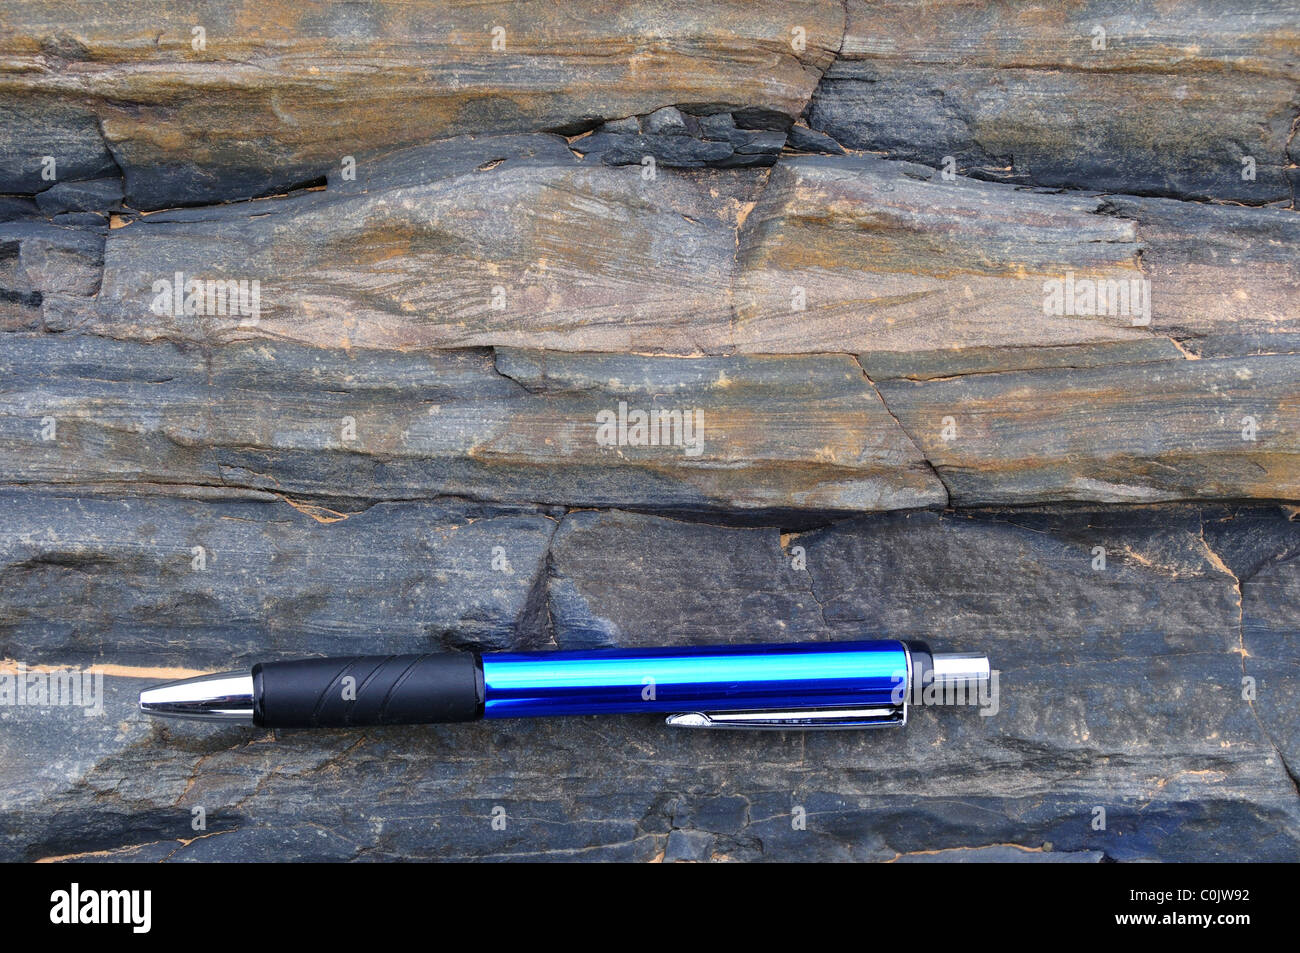 Cross beds in sandstone outcrop. South Africa. Stock Photo